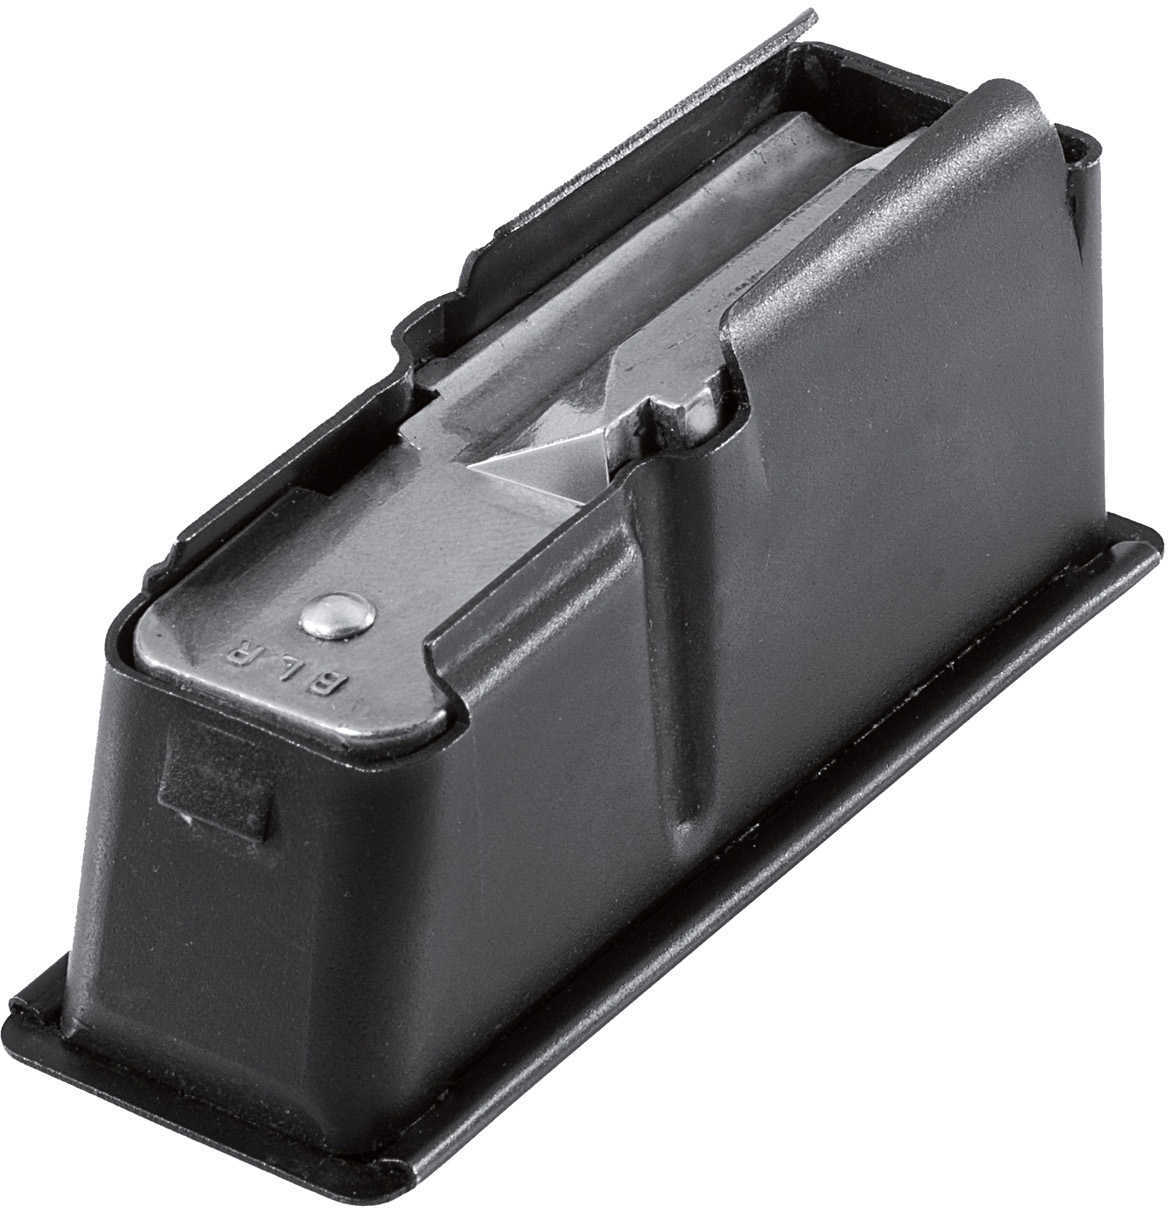 Browning Extra Magazine BLR Lightweight '81 Short Action .243 Win - 4 Rounds Flush Mounted, Detachable Box